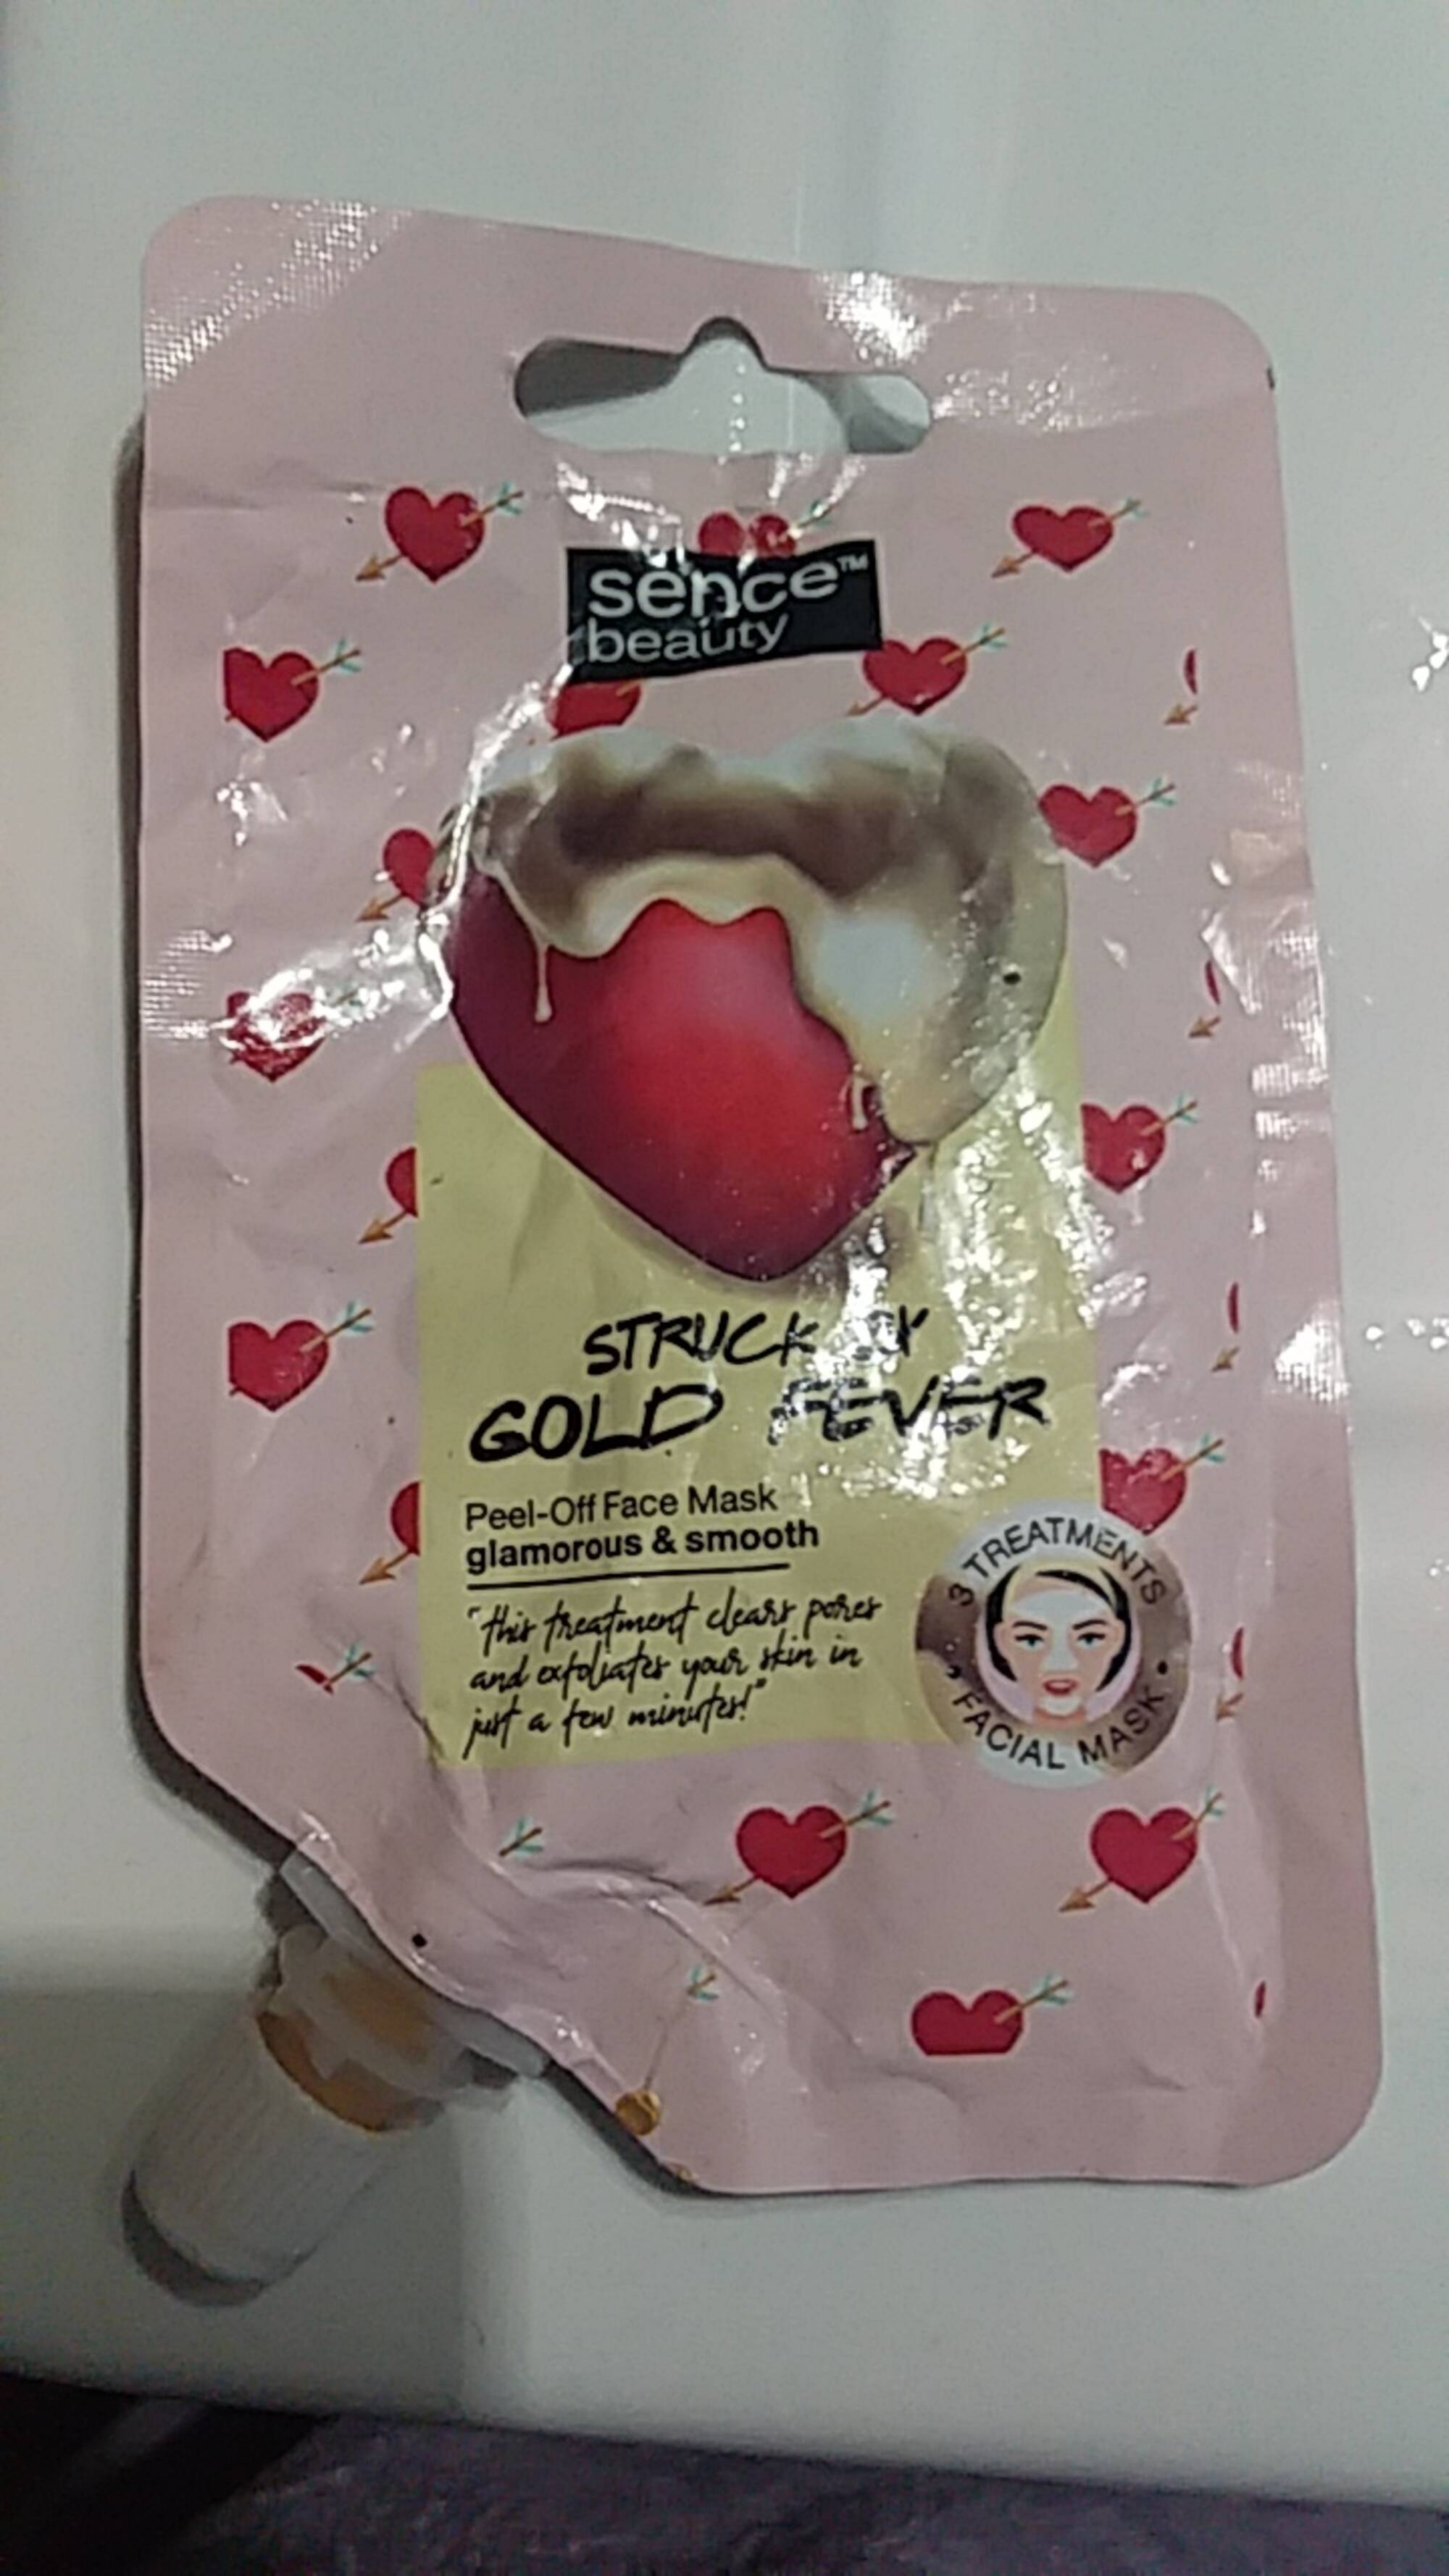 SENCE BEAUTY - Stuck by Gold fever - Peel-off face mask